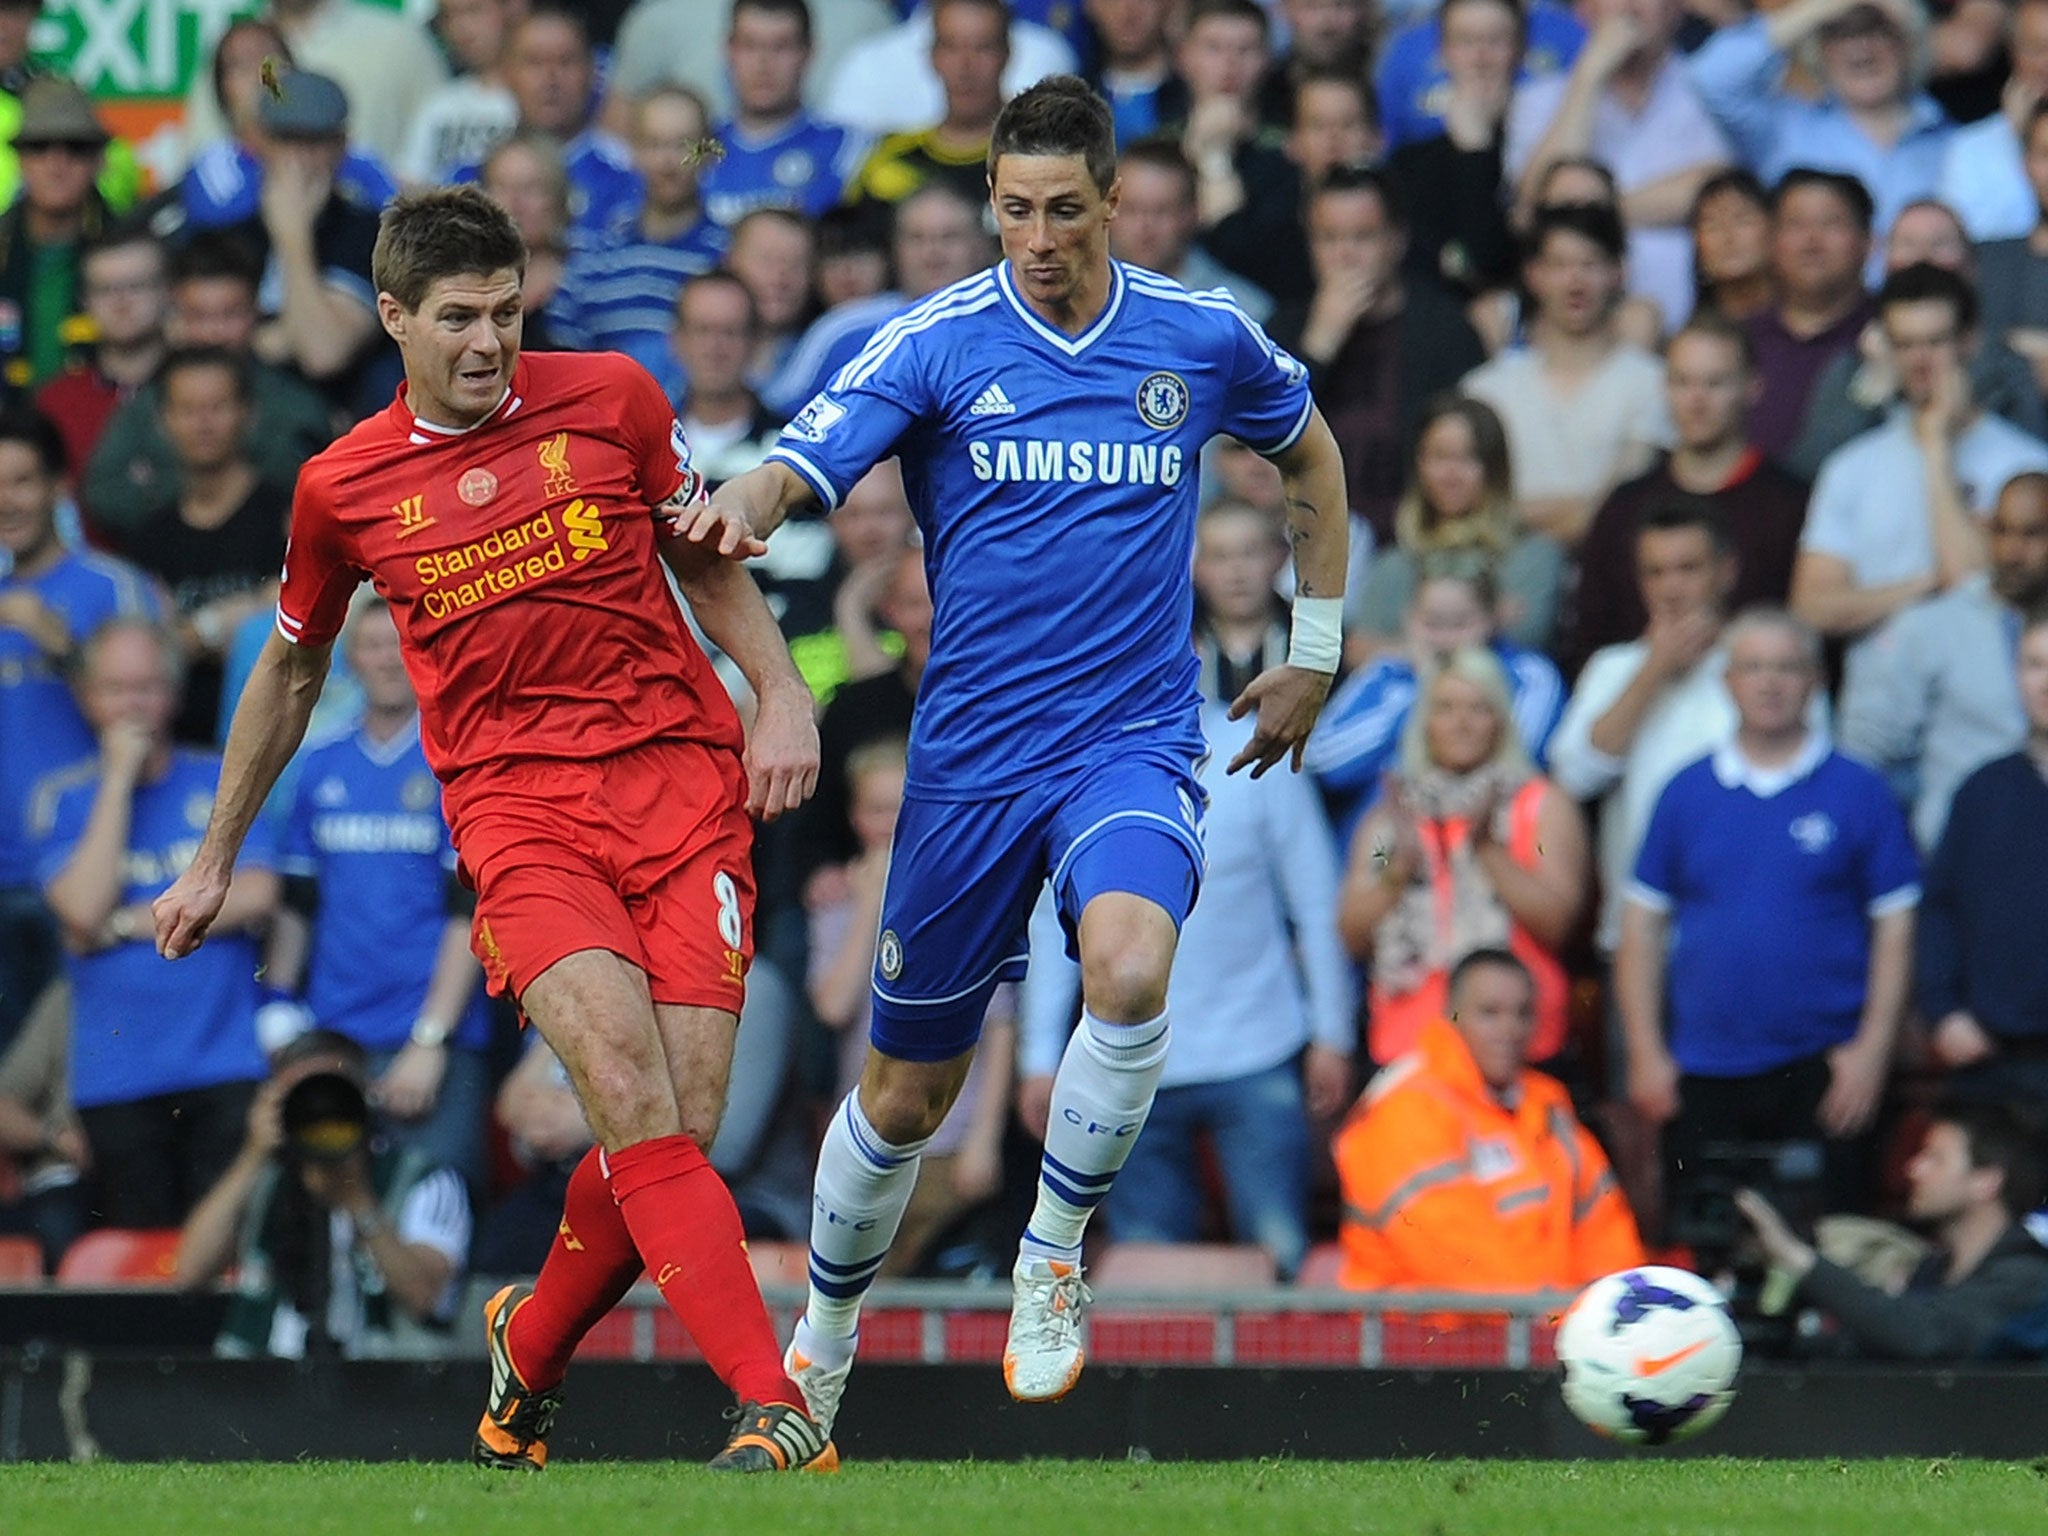 Steven Gerrard and Fernando Torres compete for the ball during a meeting between Liverpool and Chelsea in April 2014